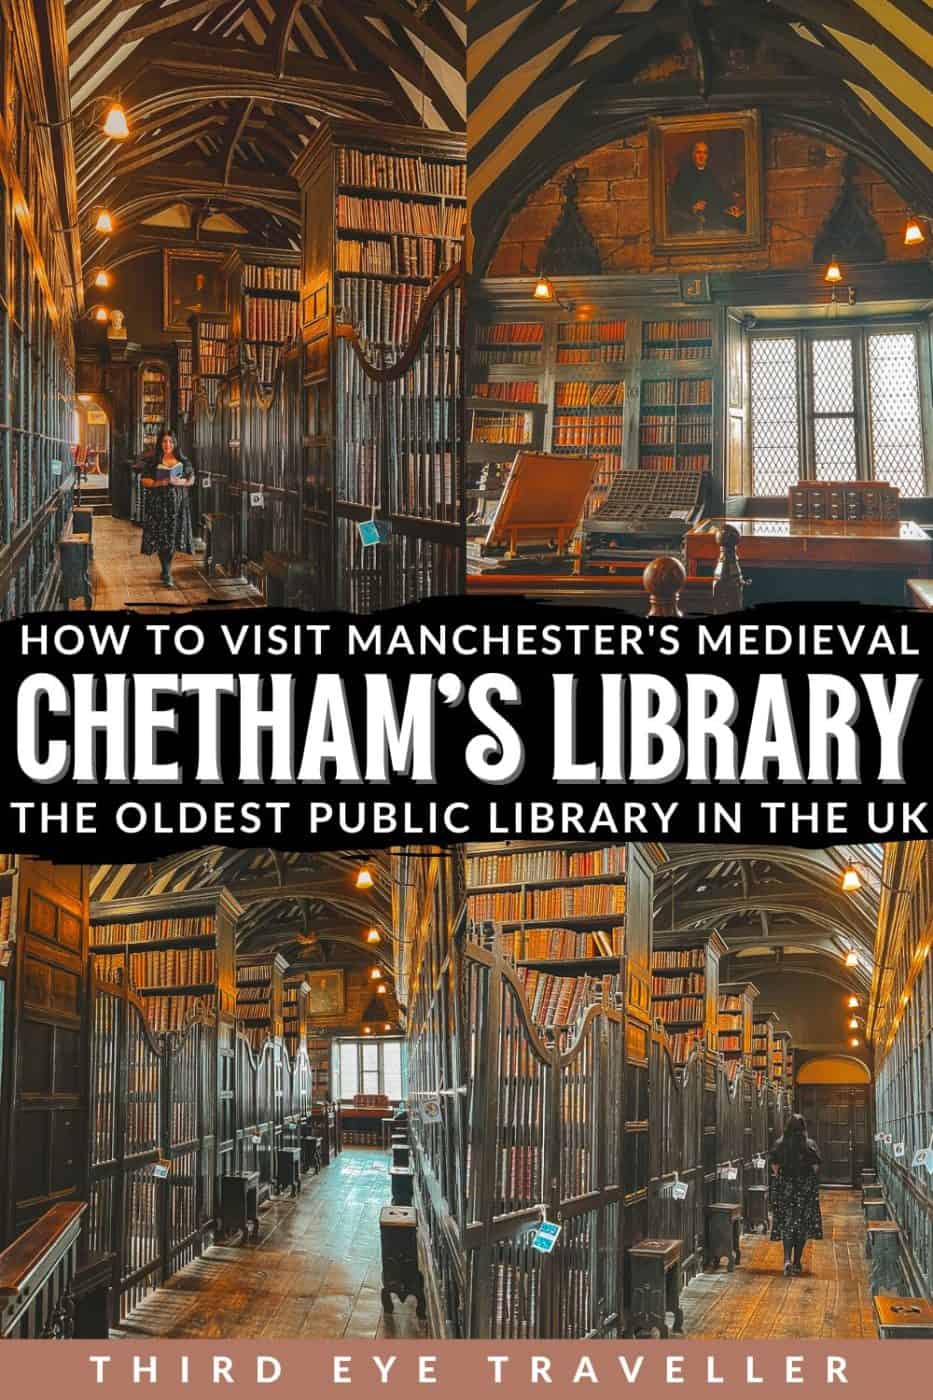 Chetham's Library Tour review Manchester UK
